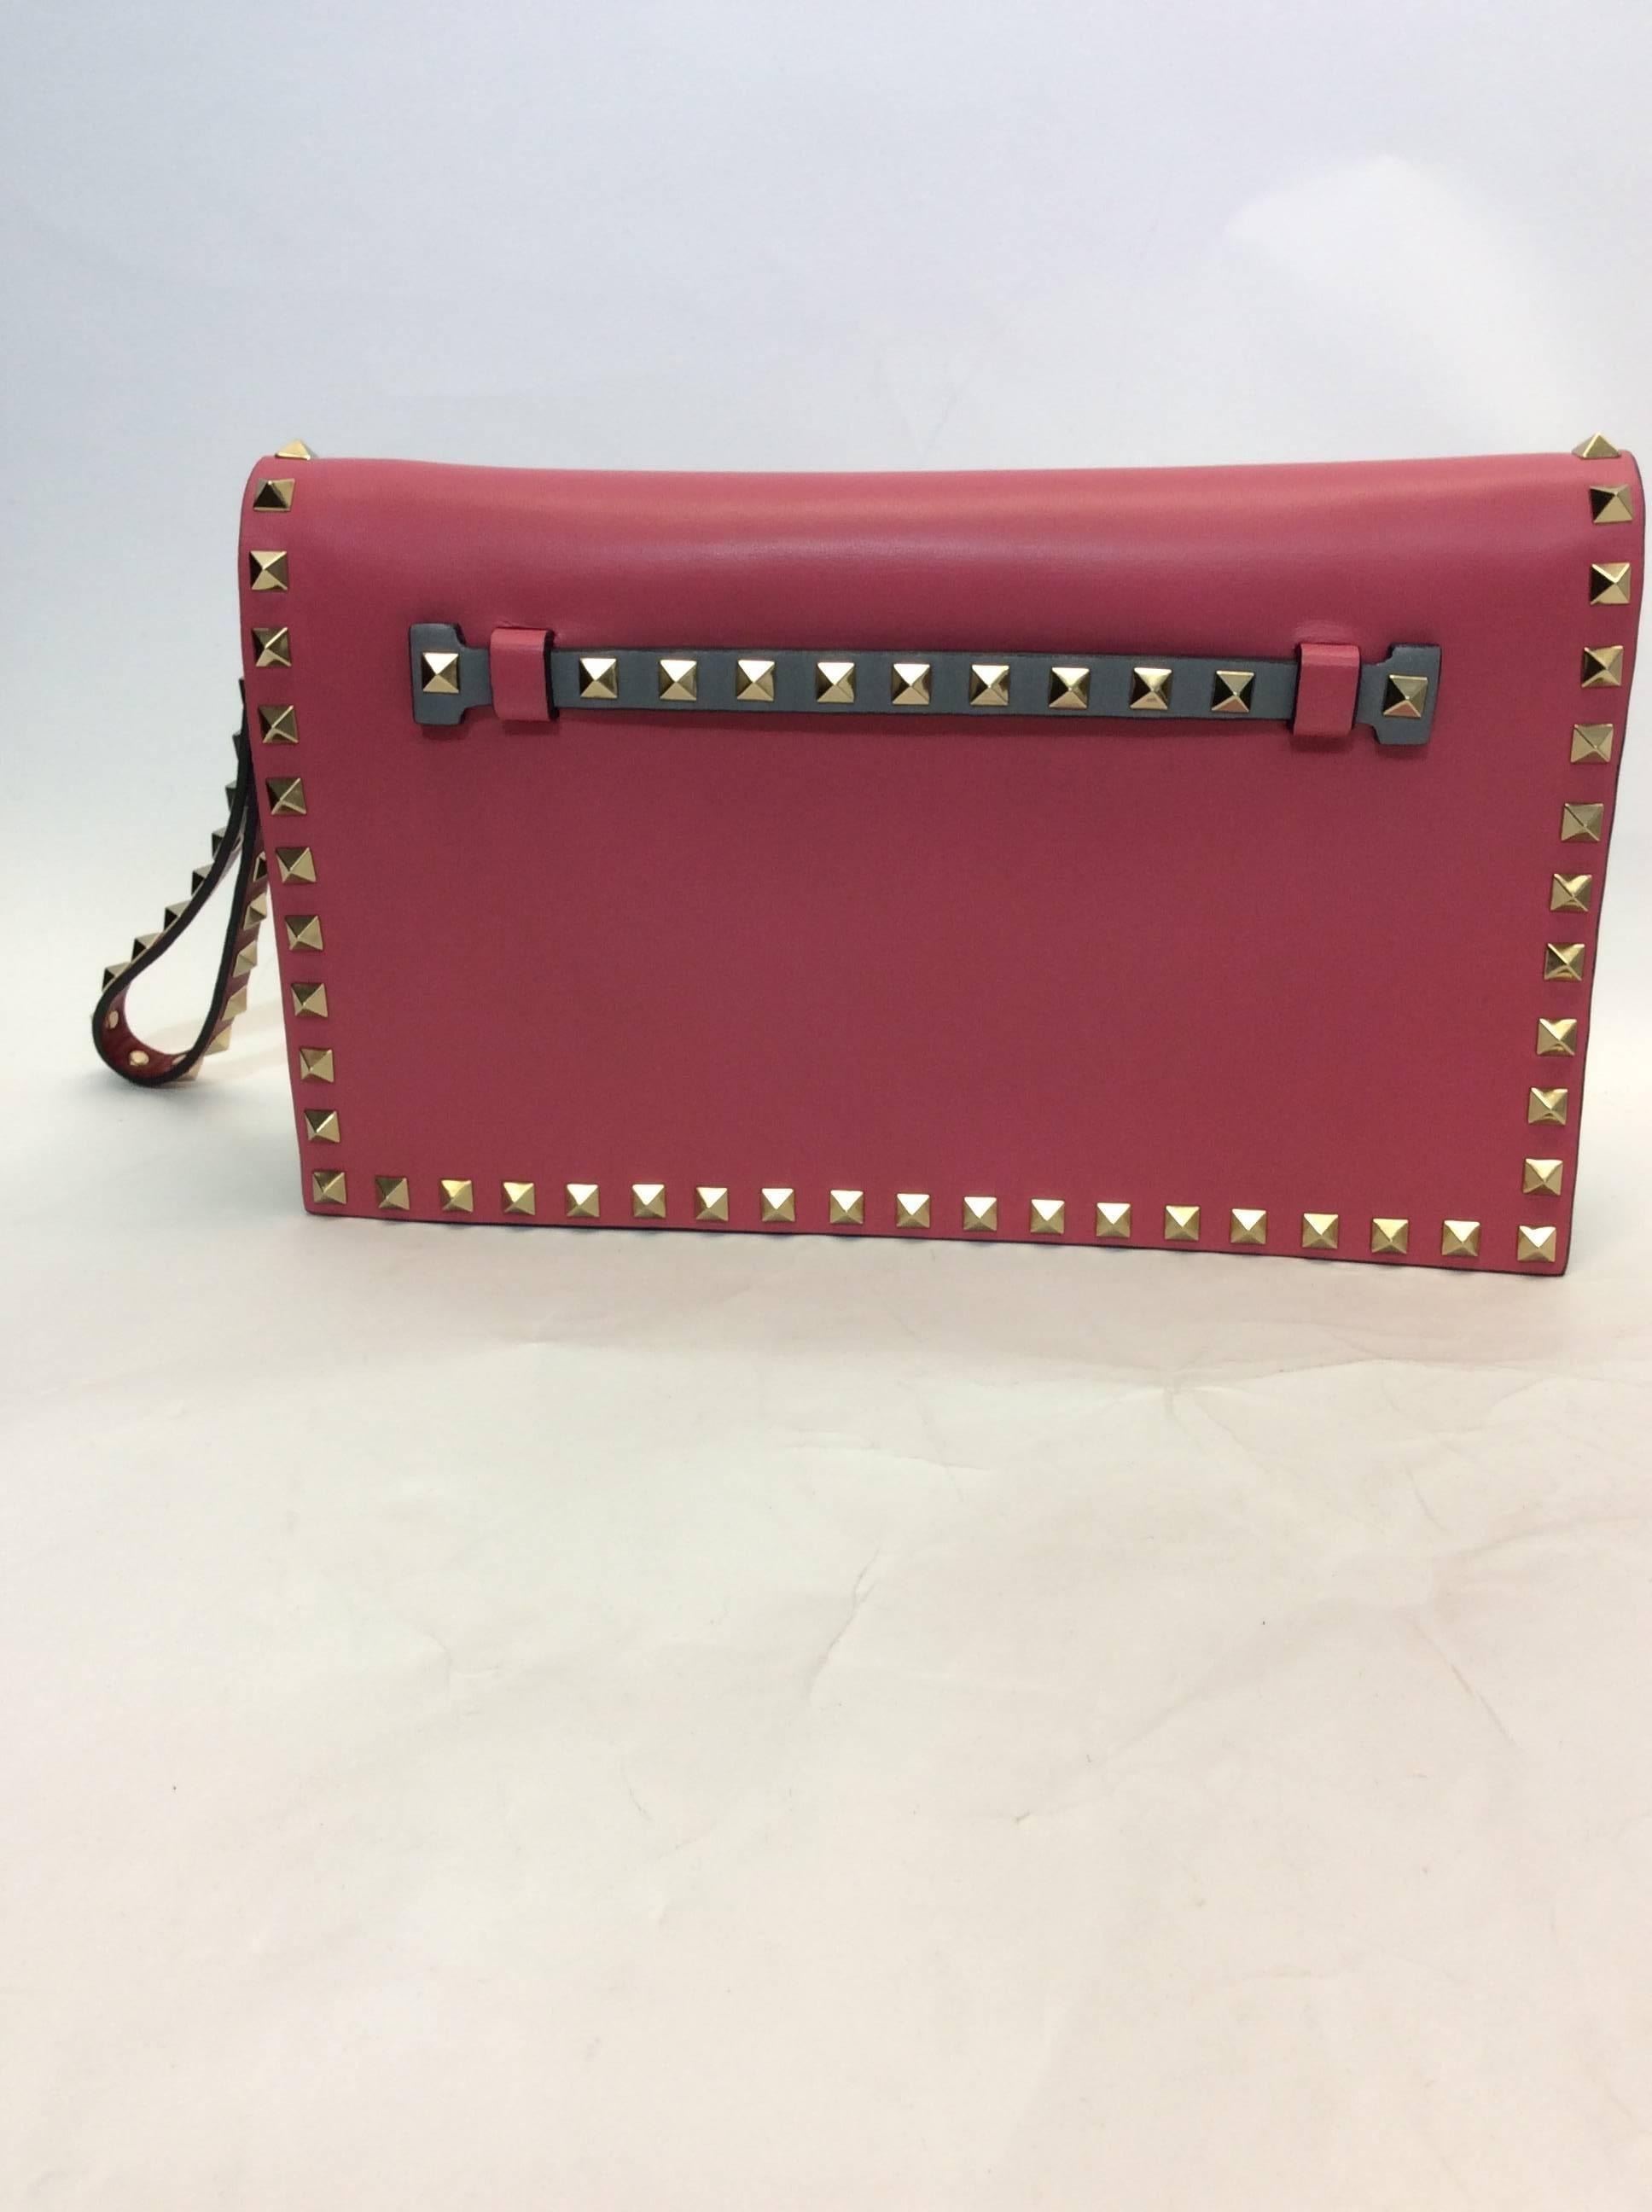 Valentino Tricolor Rockstud Flap Clutch In New Condition For Sale In Narberth, PA